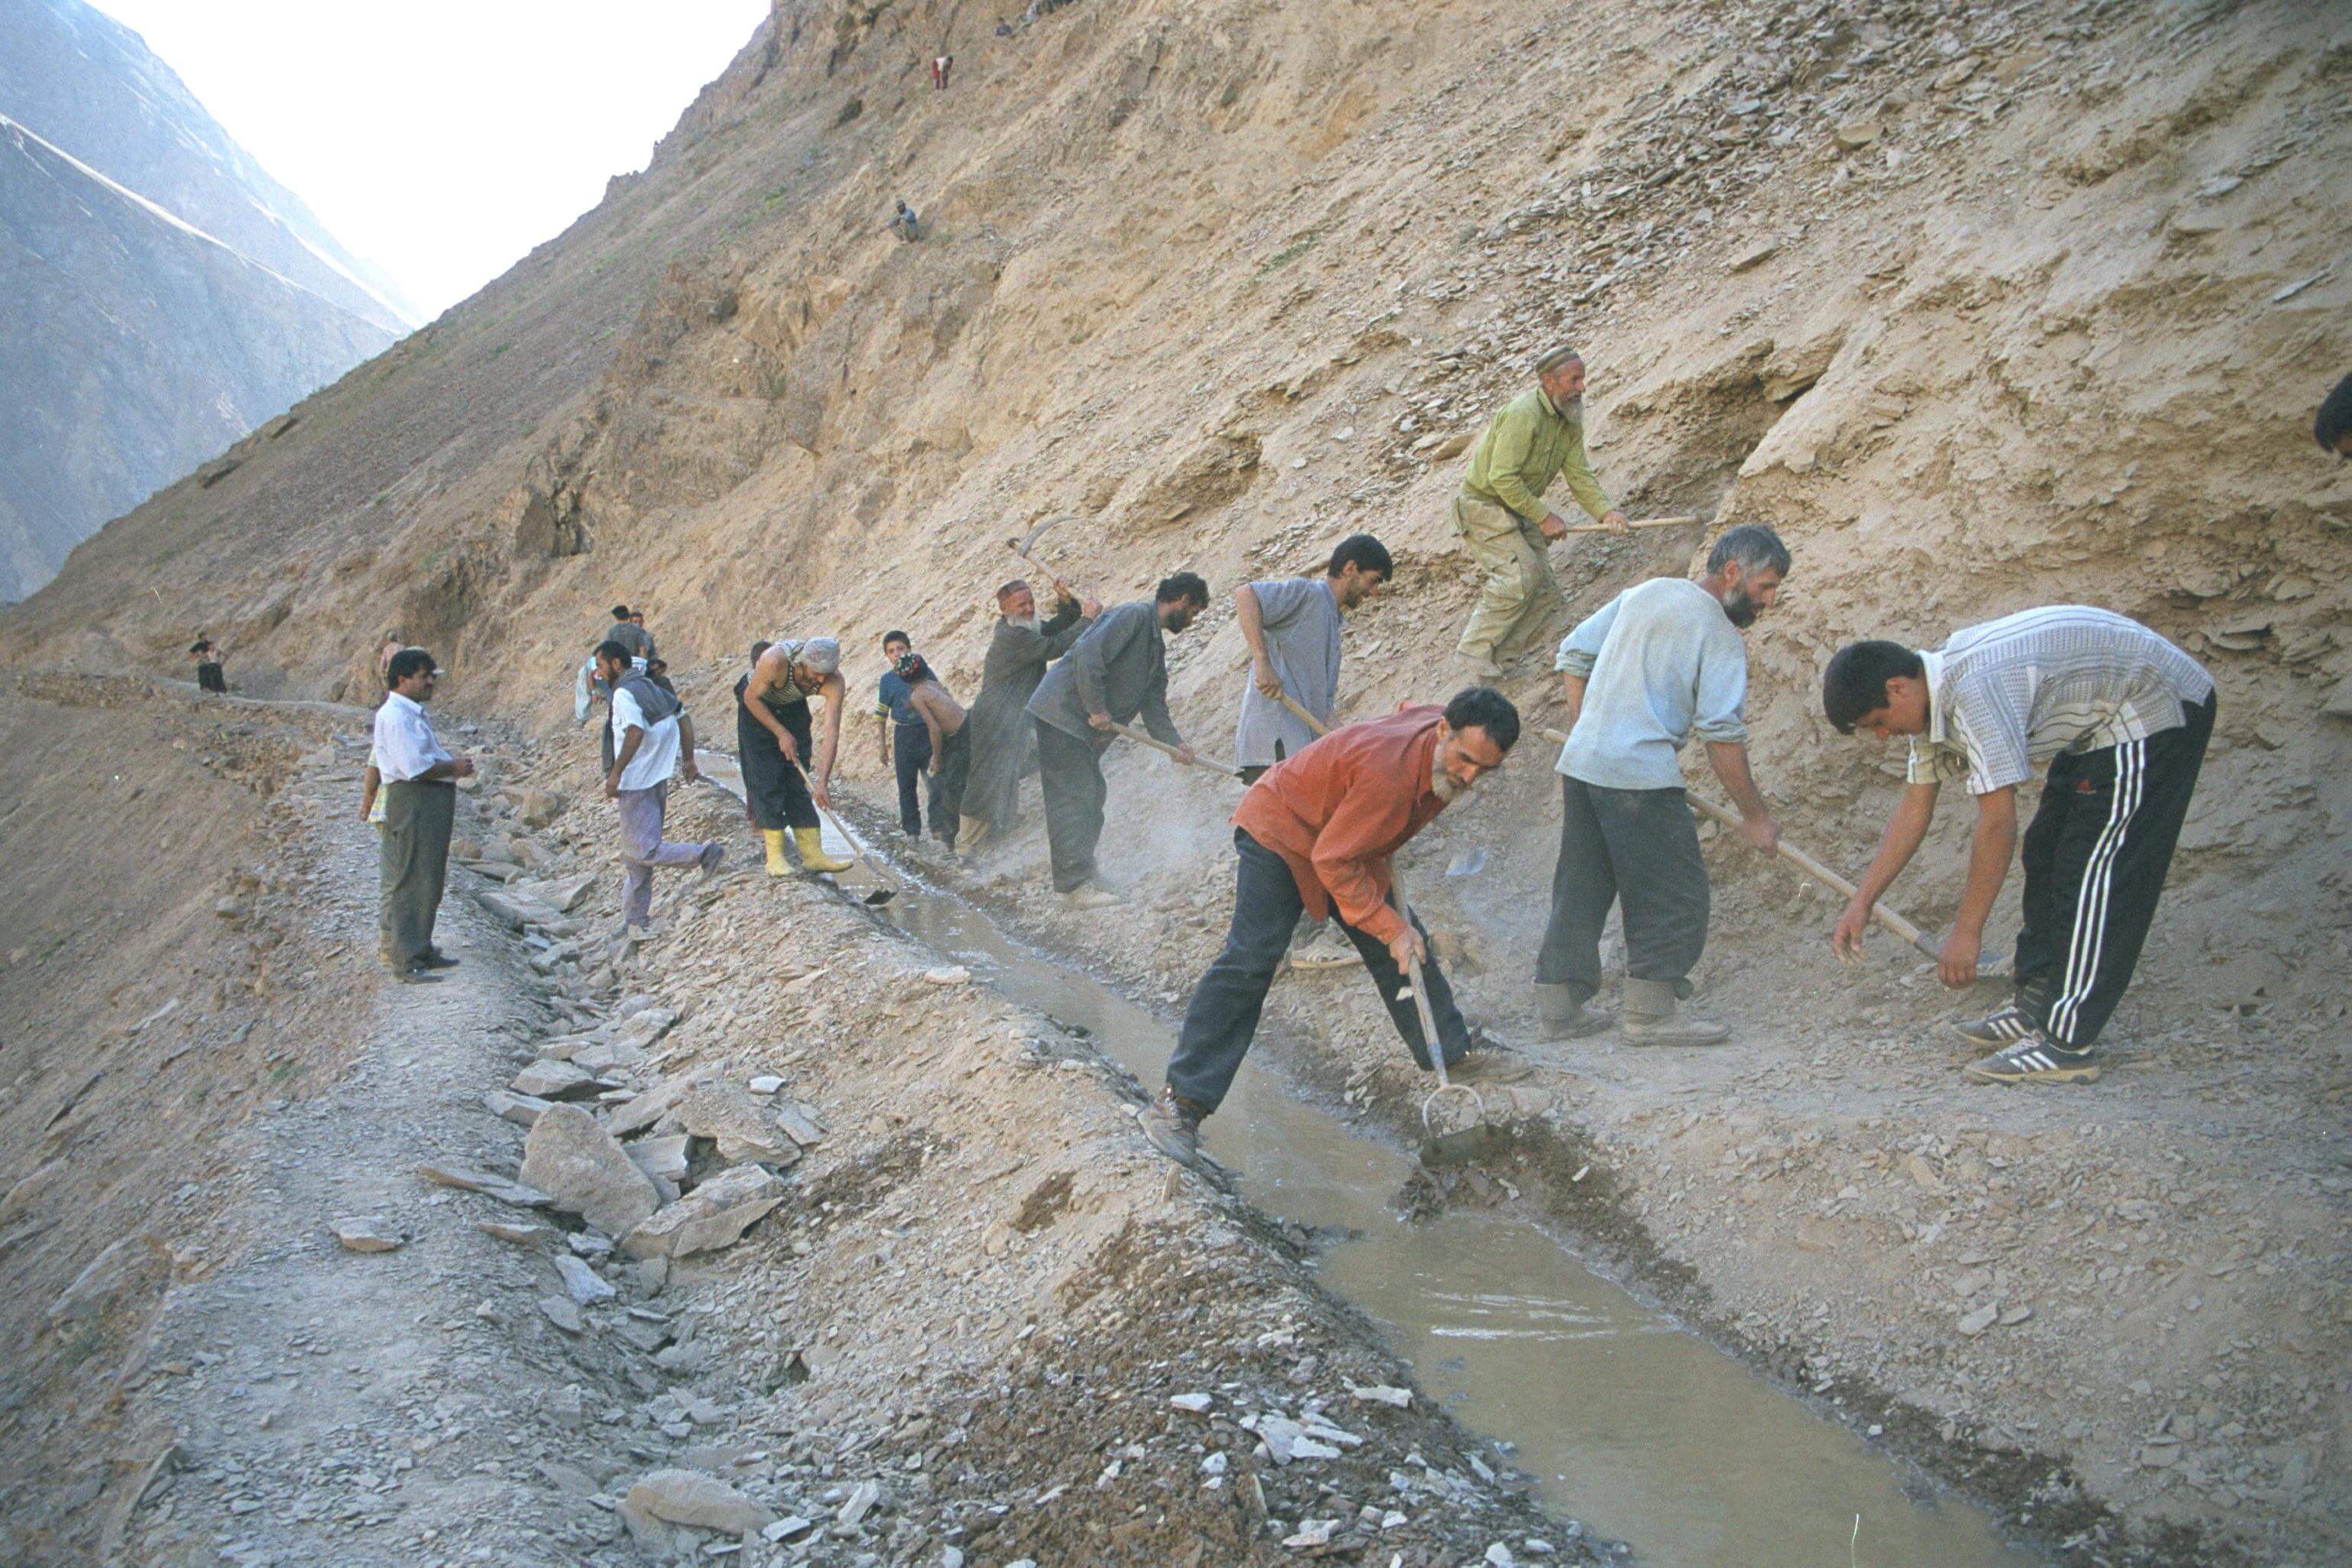 Villagers working together on a new irrigation canal in Vazgulam Valley, Tajikistan